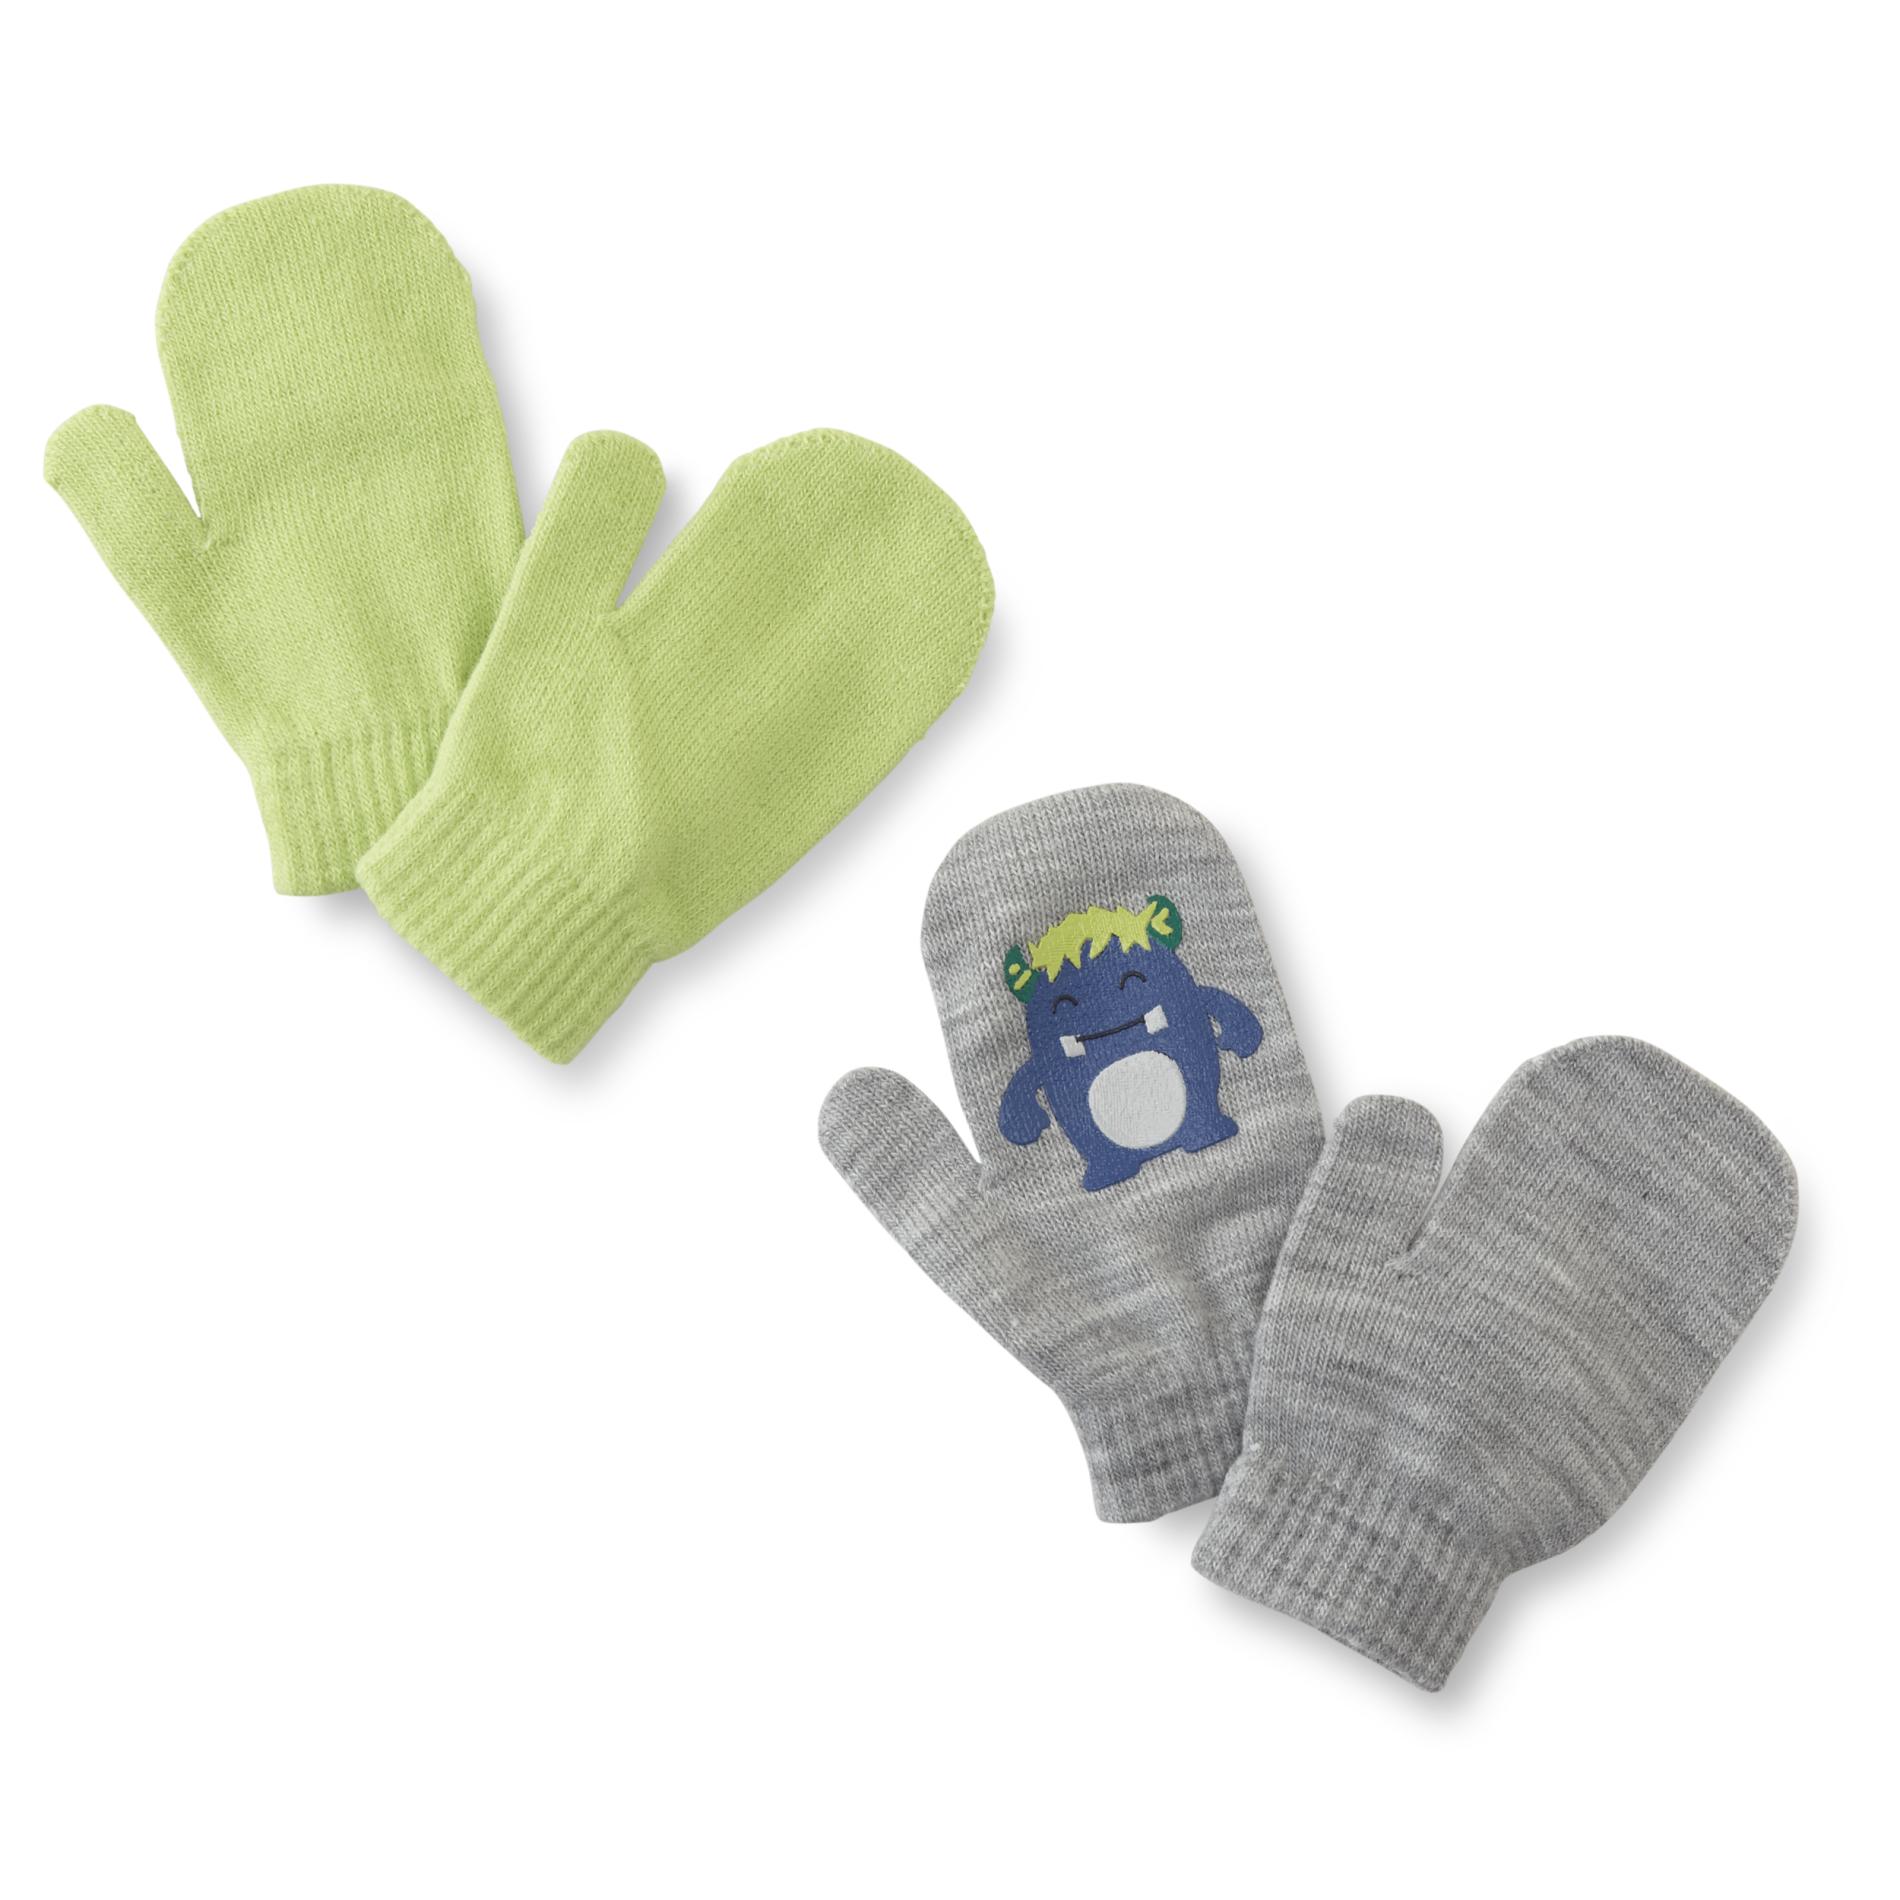 Basic Editions Toddler Boys' 2-Pairs Stretch Knit Mittens - Solid & Monster